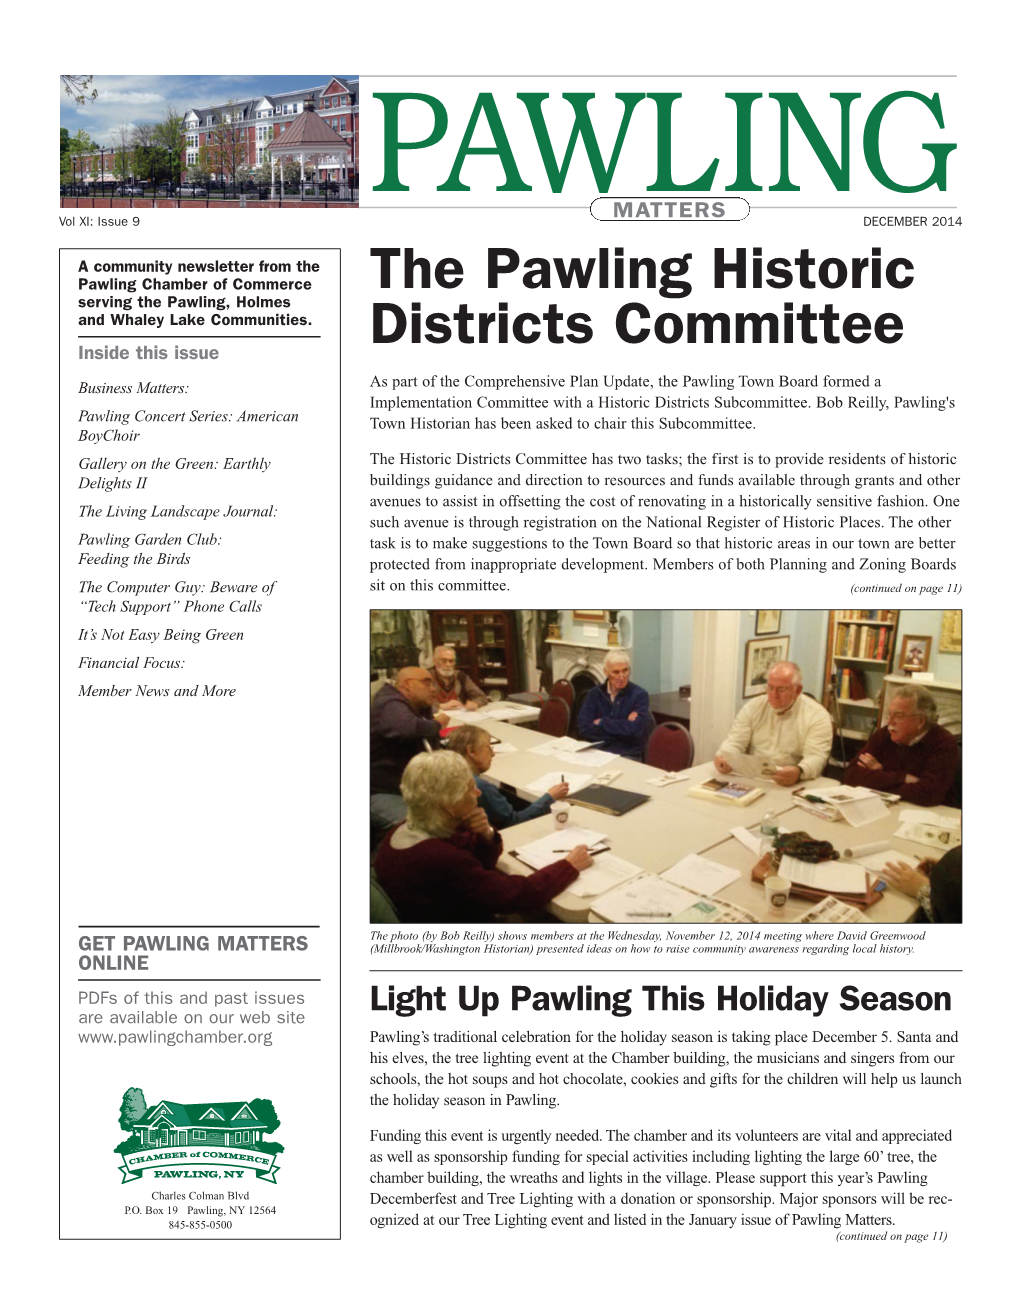 The Pawling Historic Districts Committee